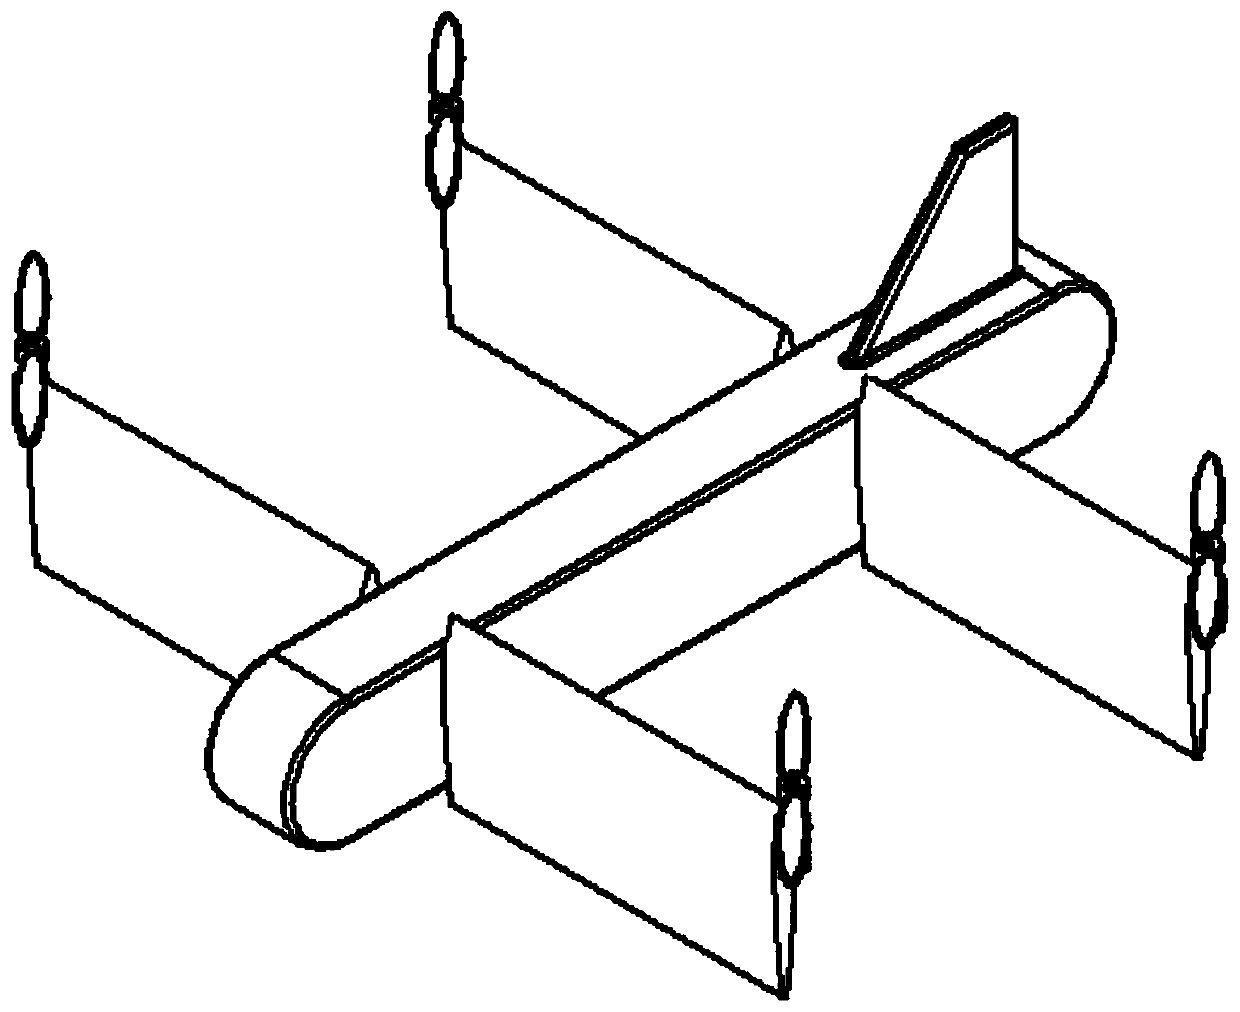 Layout and control method of tilting rotor-wing vertical take-off and landing aircraft